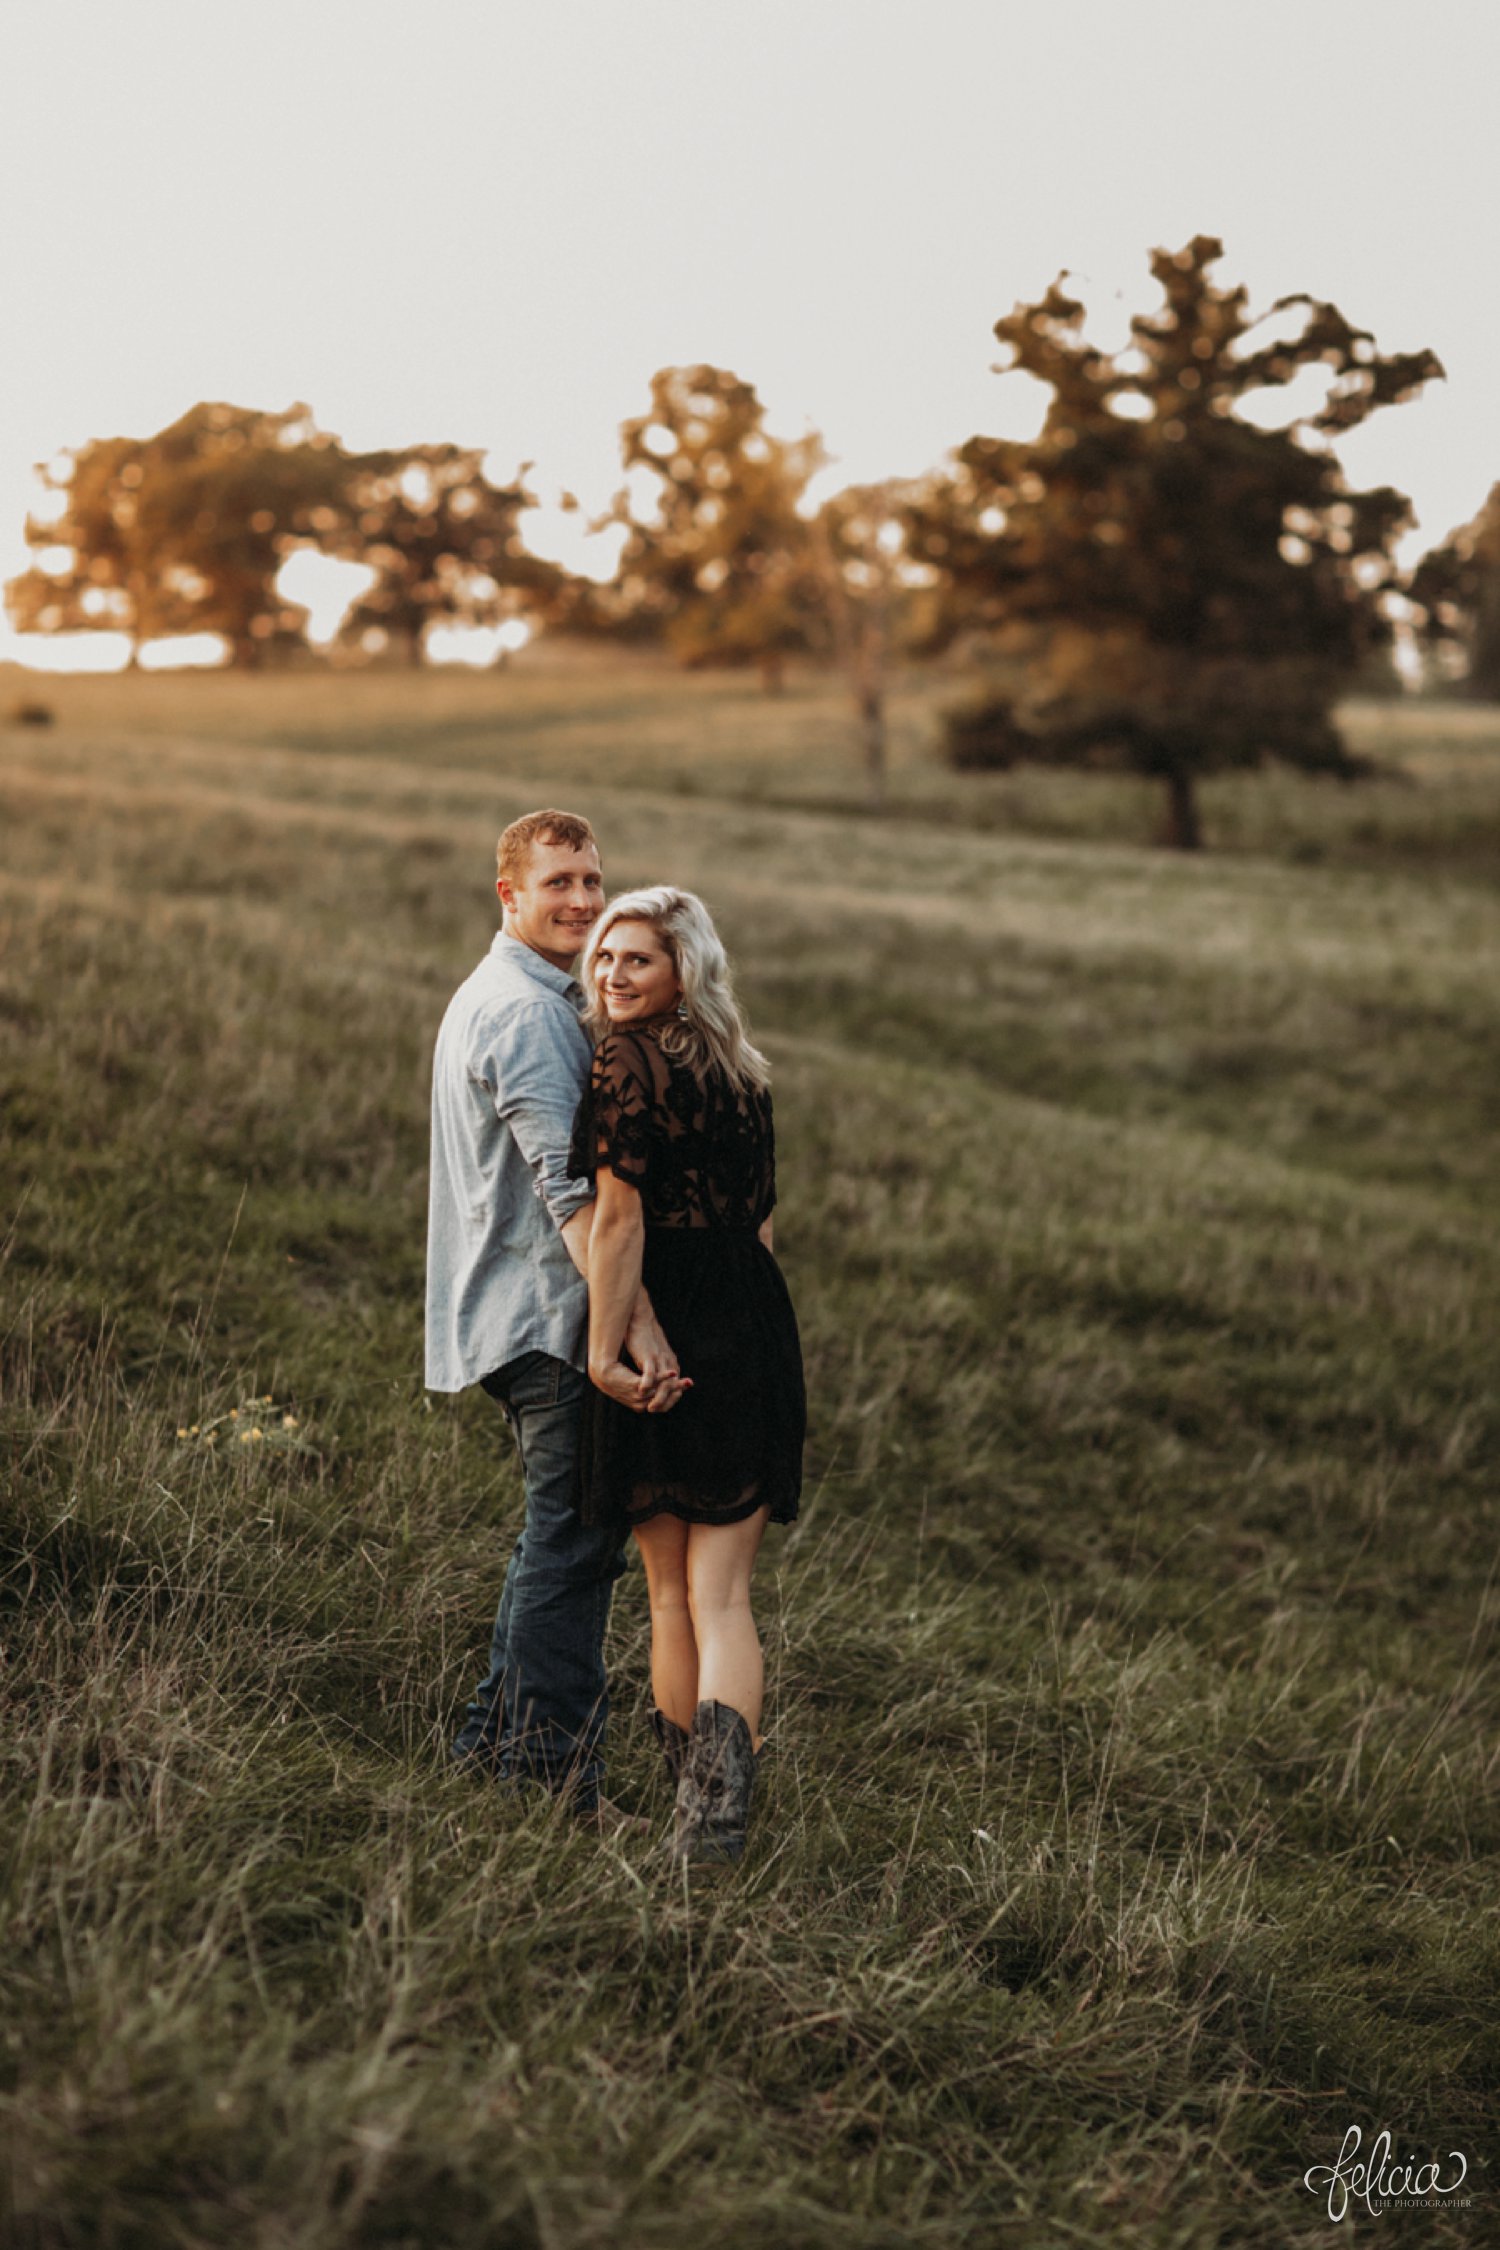 images by feliciathephotographer.com | destination wedding photographer | engagement | farmhouse | country | kansas city | sweet southern | black eyelet romper | unique halo diamond ring | casual | black boots | amazon | cowboy | red nails | nature | holding hands | golden hour | 